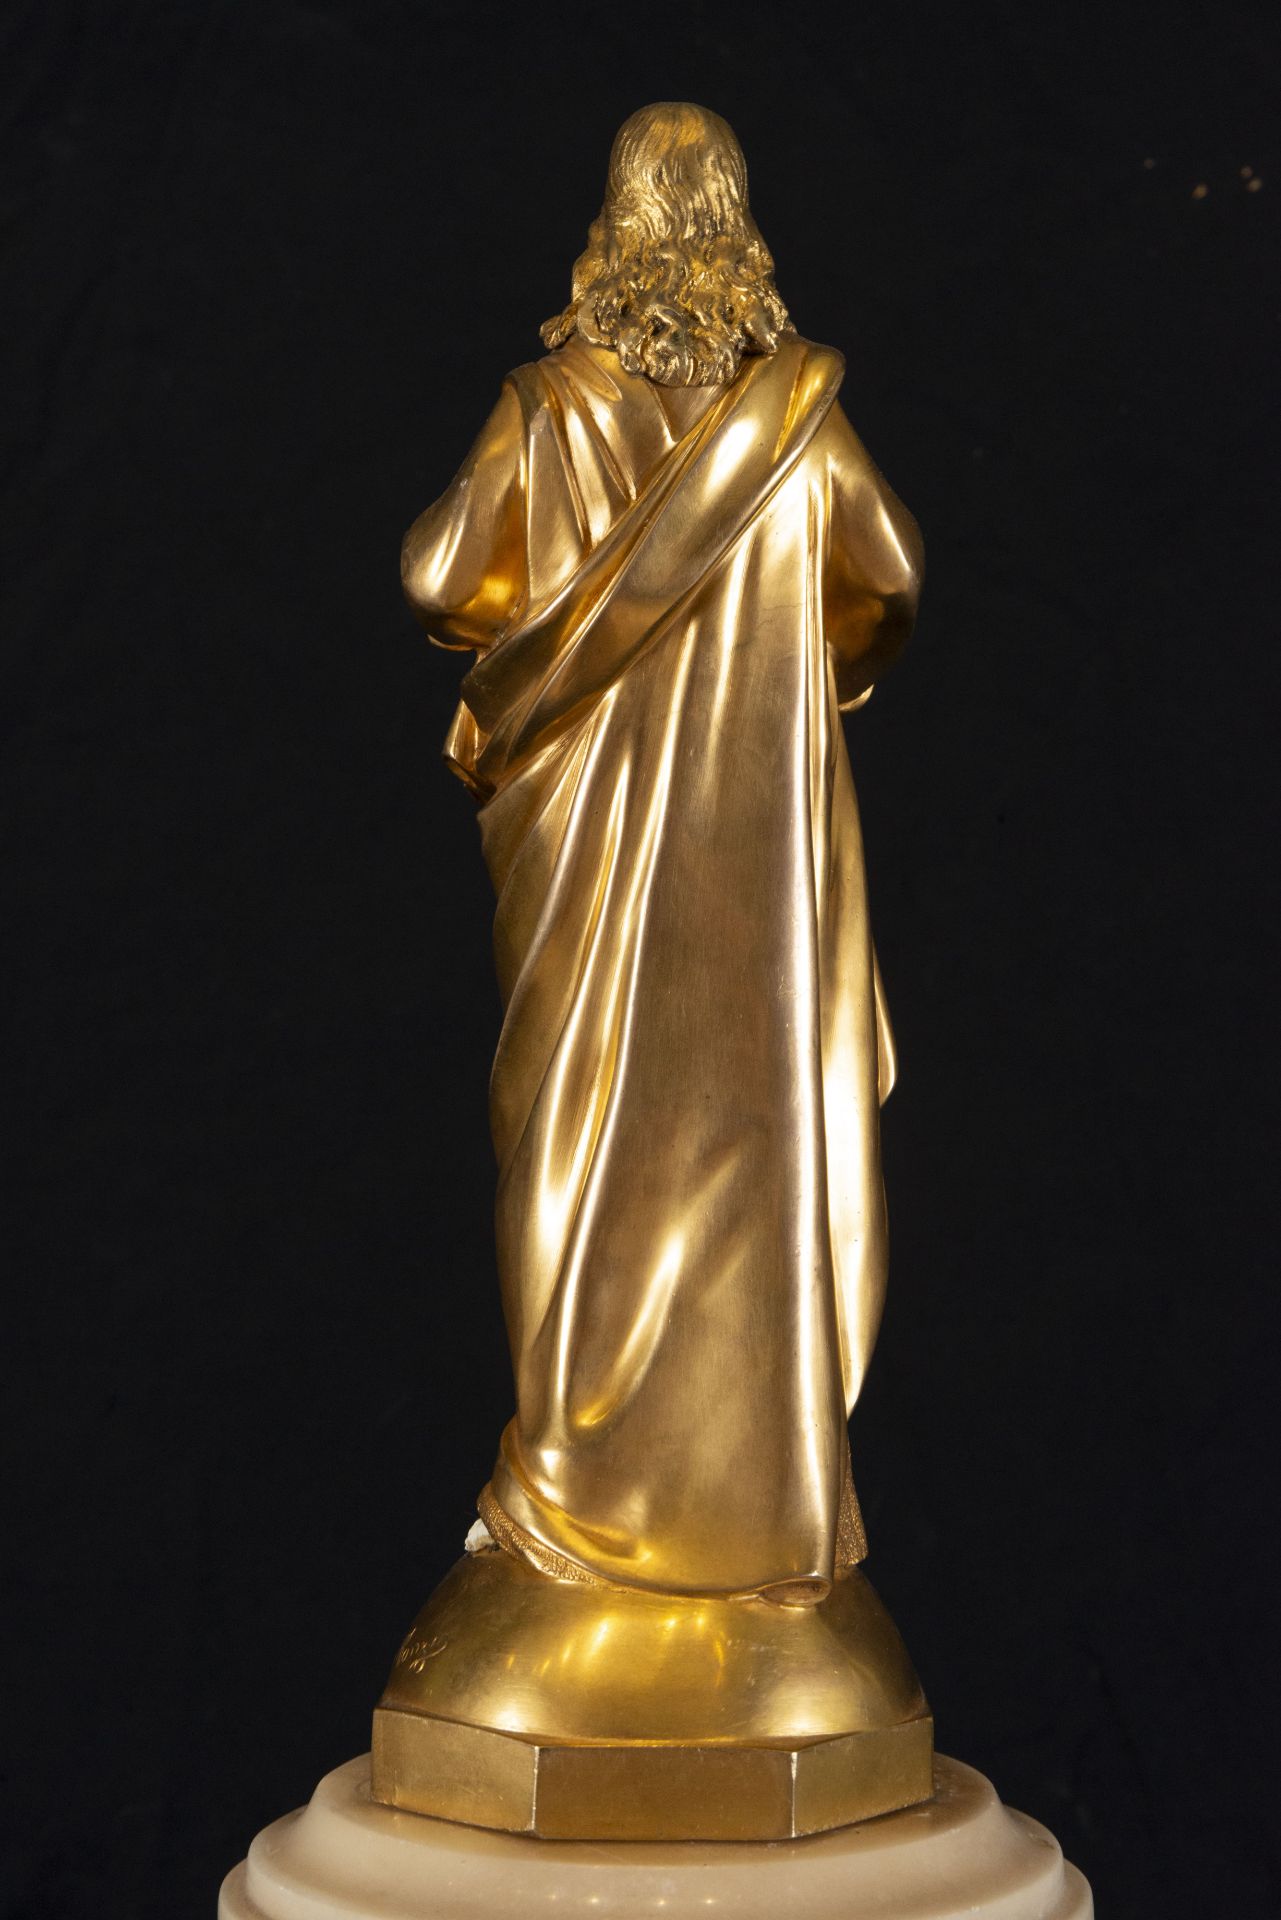 Beautiful Chryselephantine Sculpture from the Art Nouveau period representing the Sacred Heart of Je - Image 3 of 3